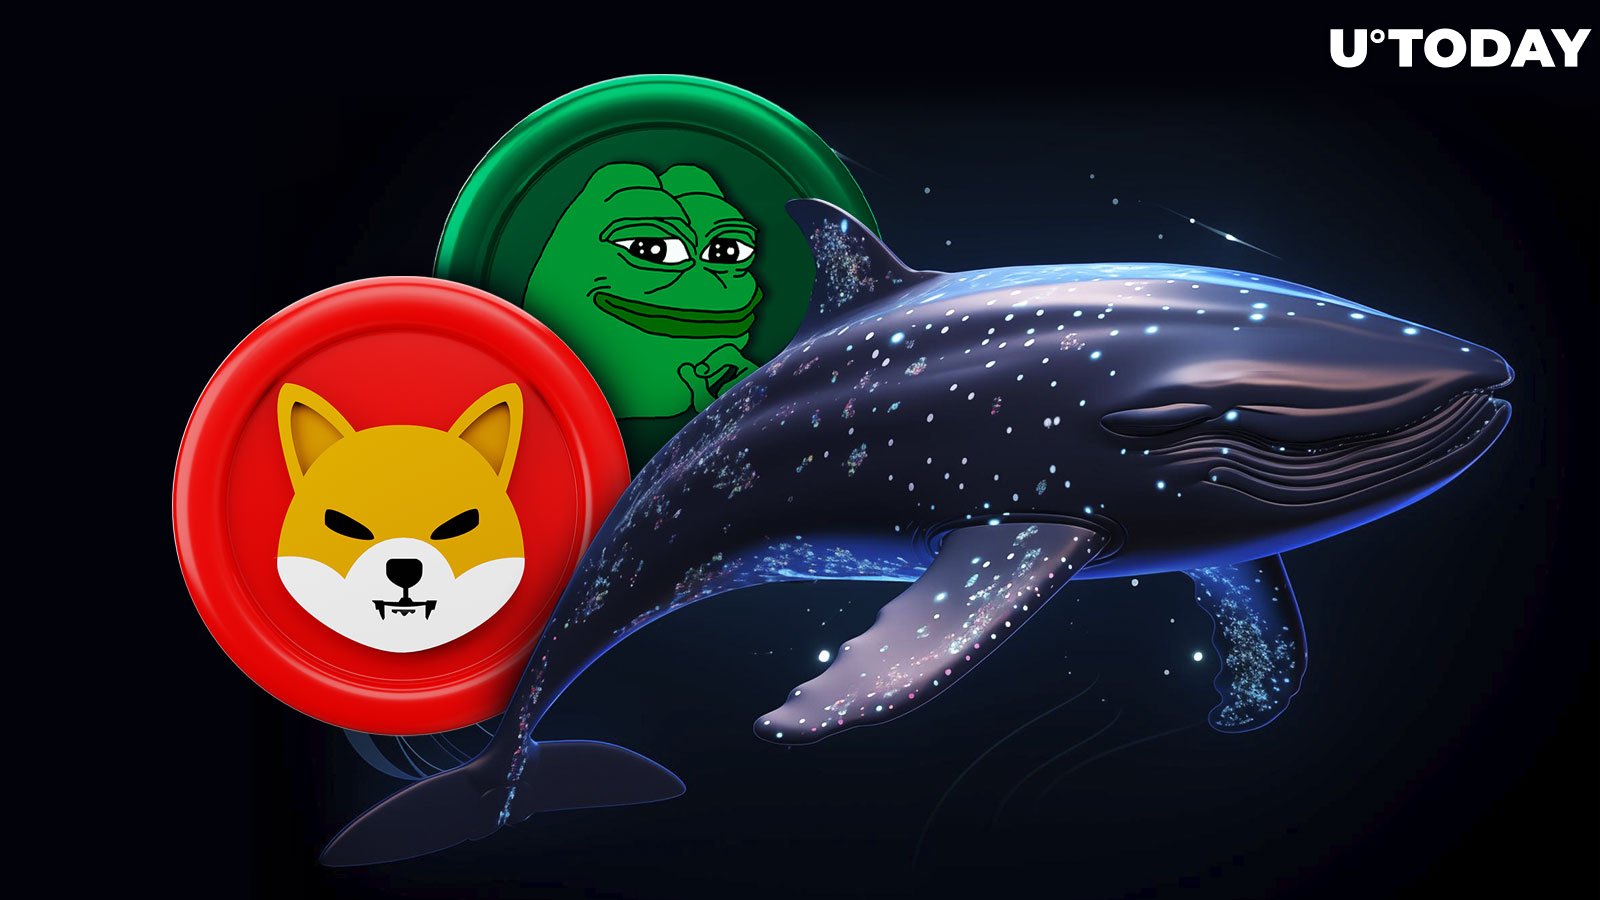 Whale Banks $3.49 million from PEPE, moves major stake to SHIB and other currencies